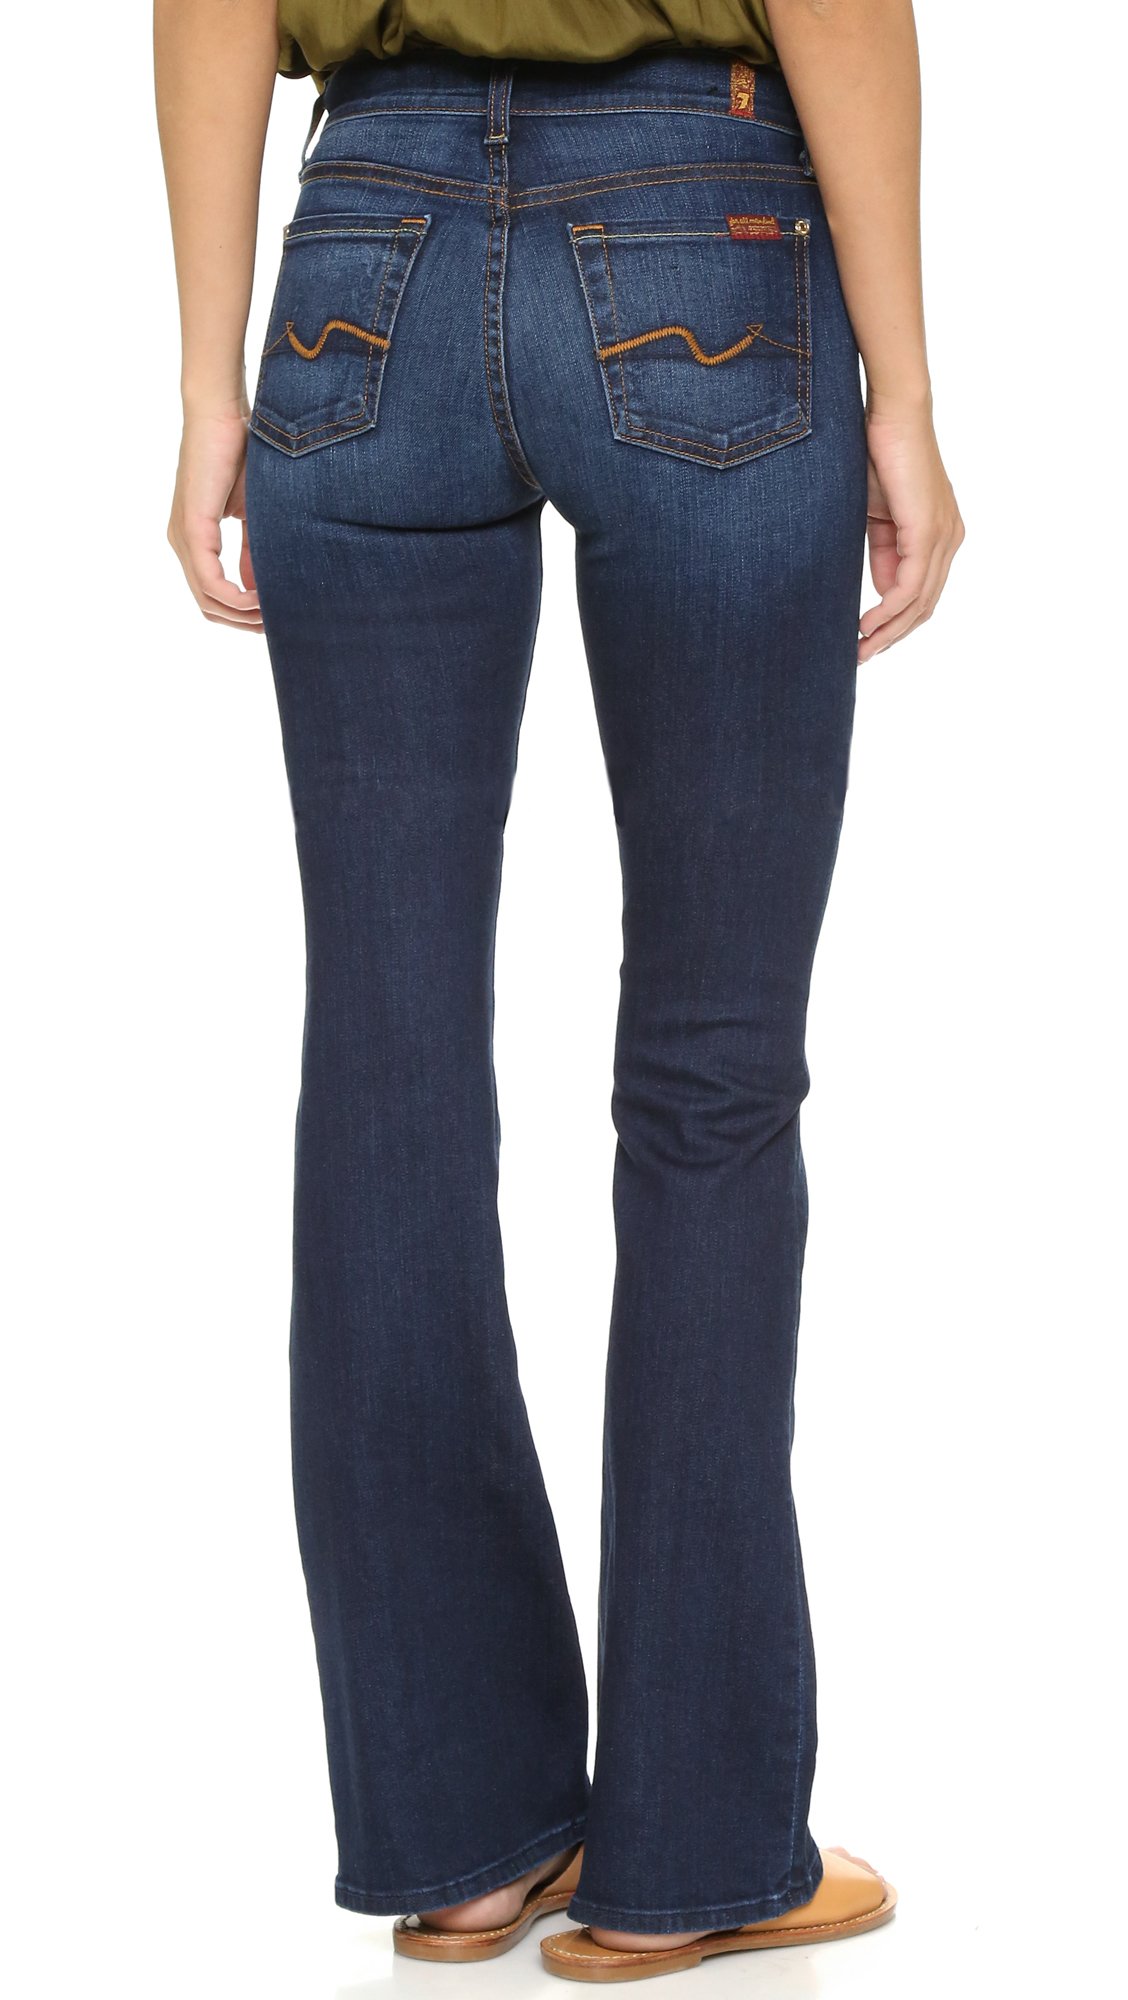 Lyst - 7 For All Mankind Iconic Boot Cut Jeans in Blue